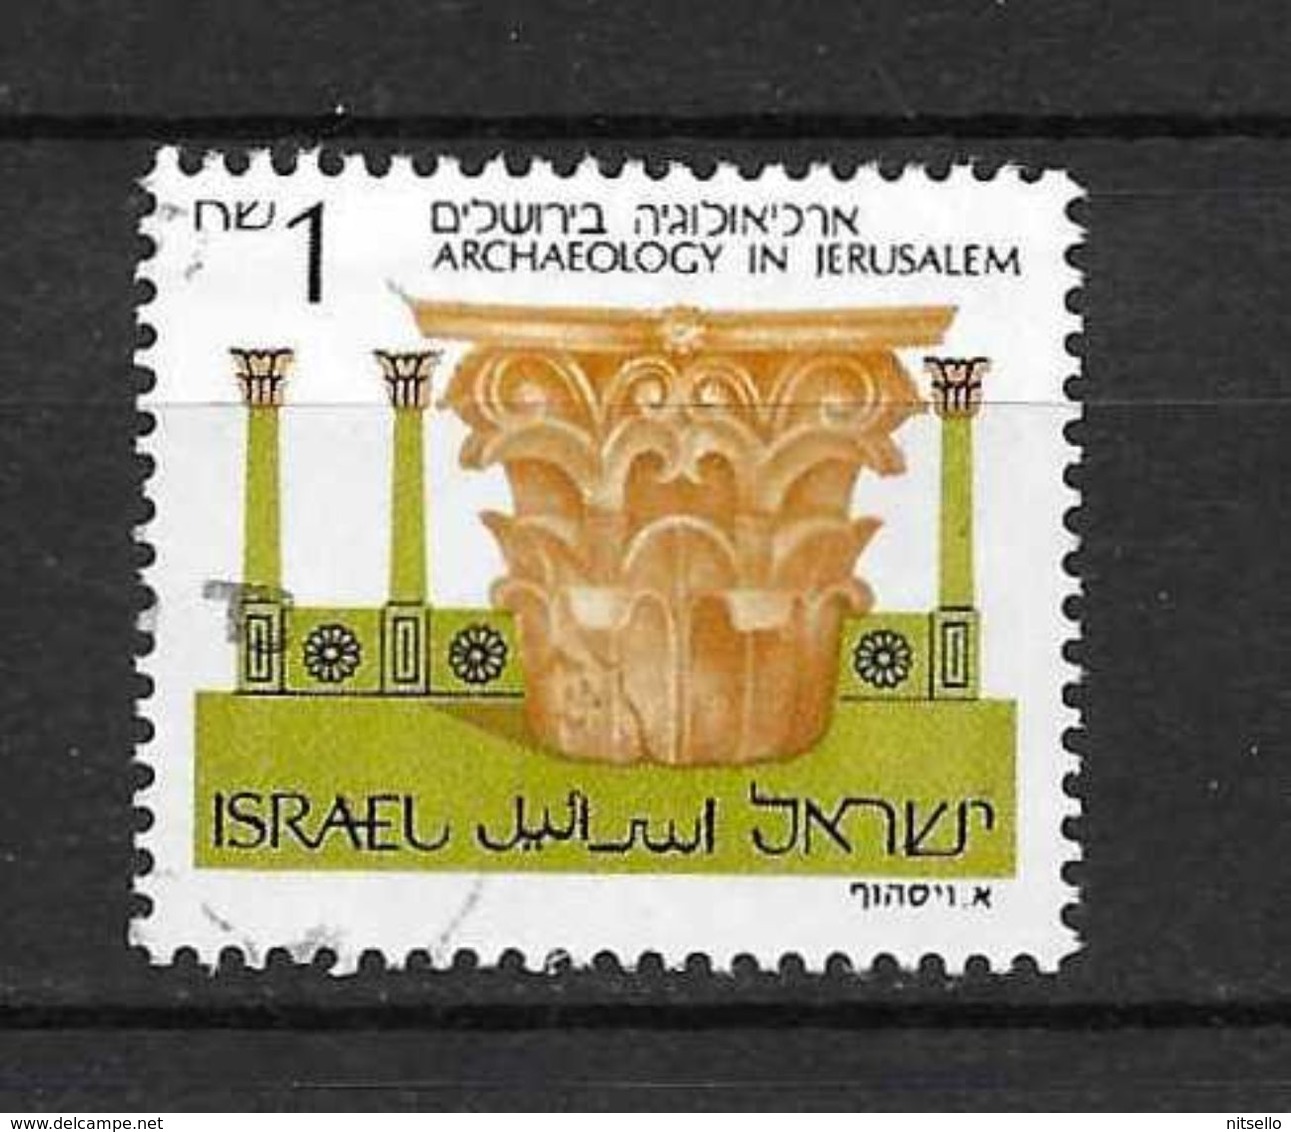 LOTE 1441  ///  ISRAEL  NSG  ¡¡¡¡ LIQUIDATION !!!! - Used Stamps (without Tabs)